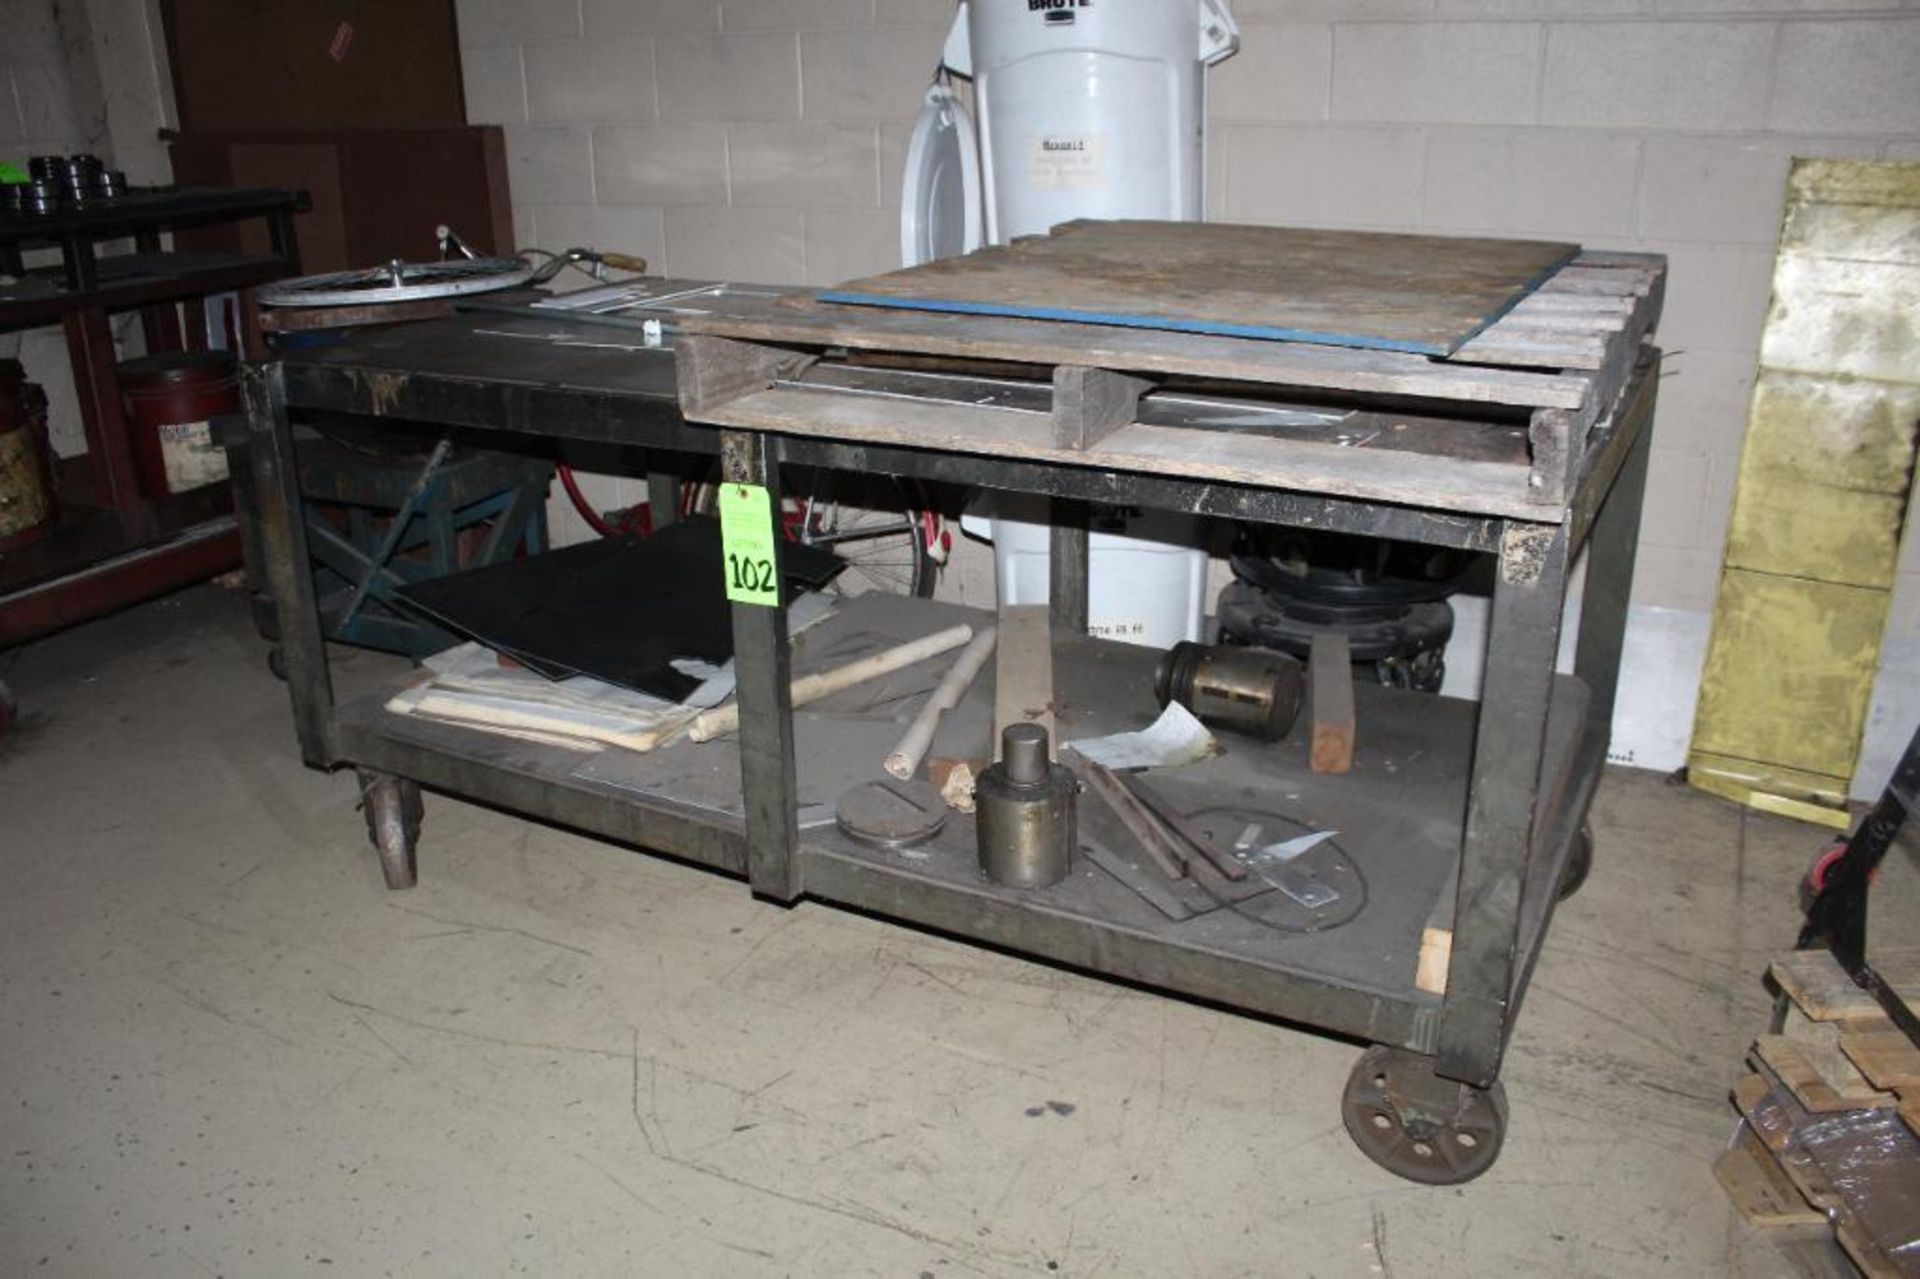 Rolling Table Cart 80"x36.5"x36.5"